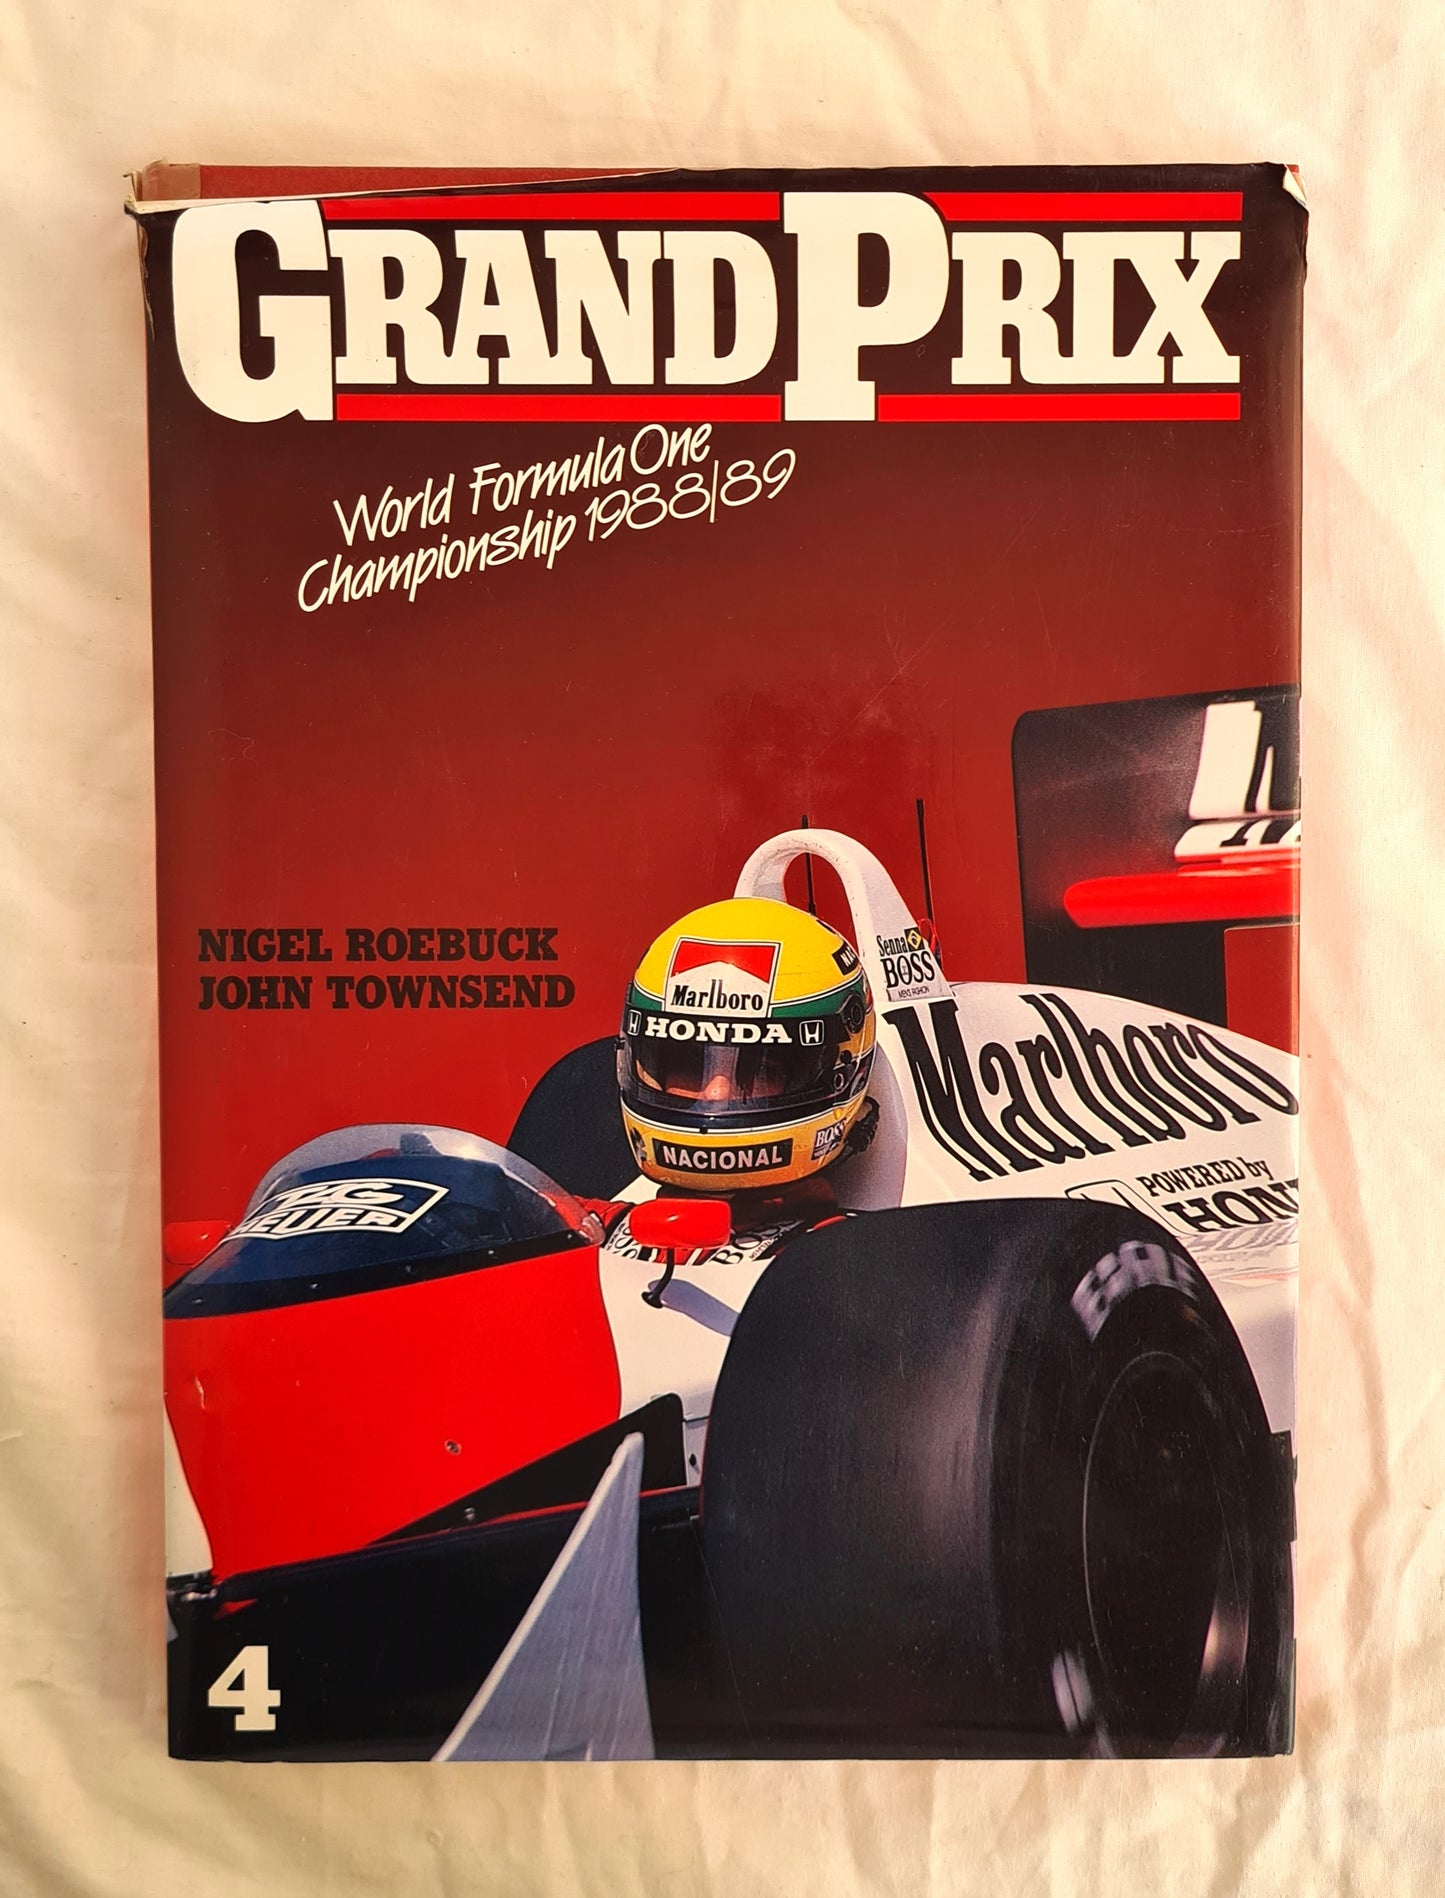 Grand Prix  World Formula One Championship 1988/89  by Nigel Roebuck and John Townsend  Edited by Barry Naismith